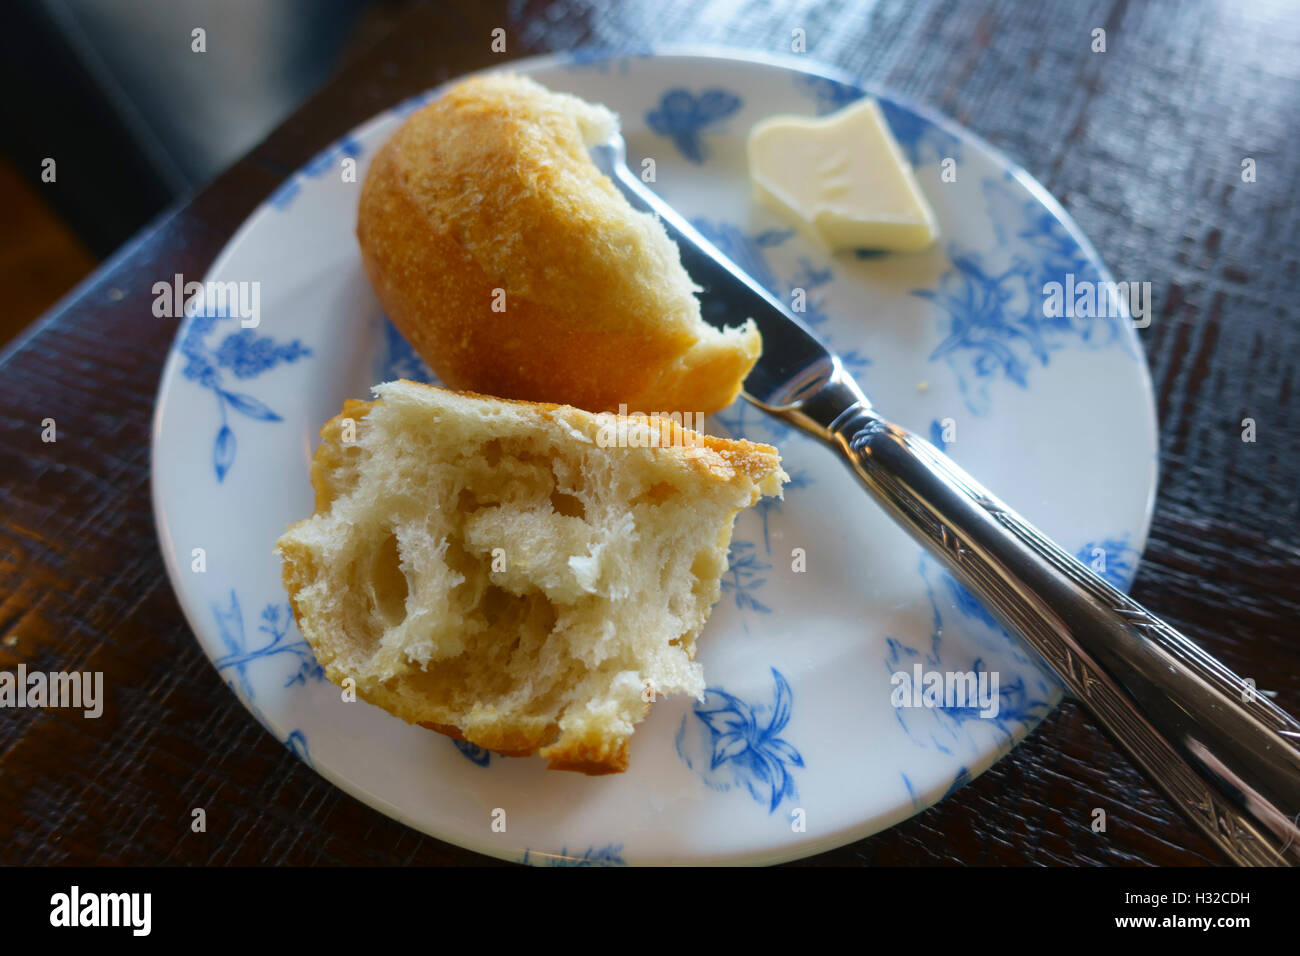 Crusty white roll with knife and butter on a blue and white plate Stock Photo